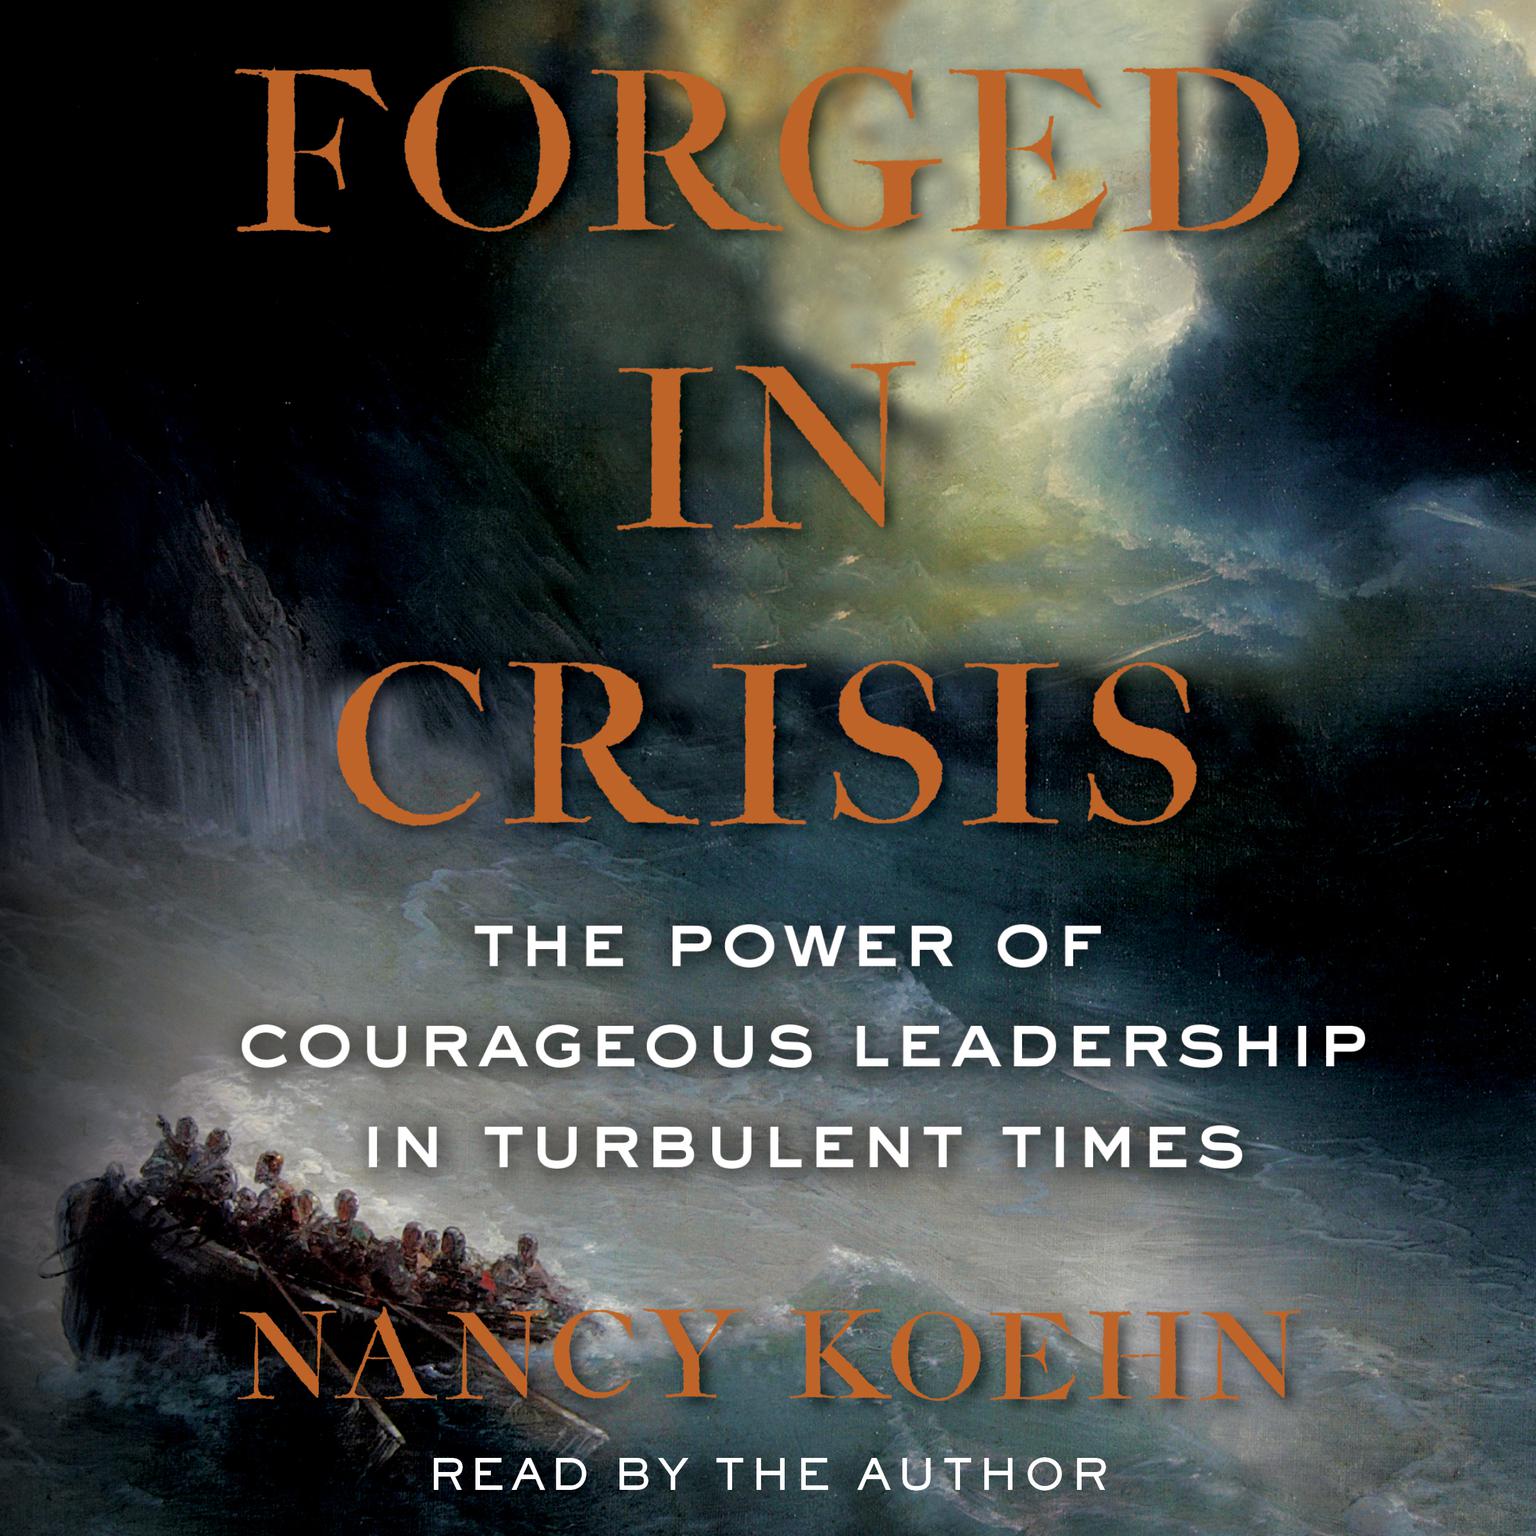 Forged in Crisis: The Power of Courageous Leadership in Turbulent Times Audiobook, by Nancy Koehn